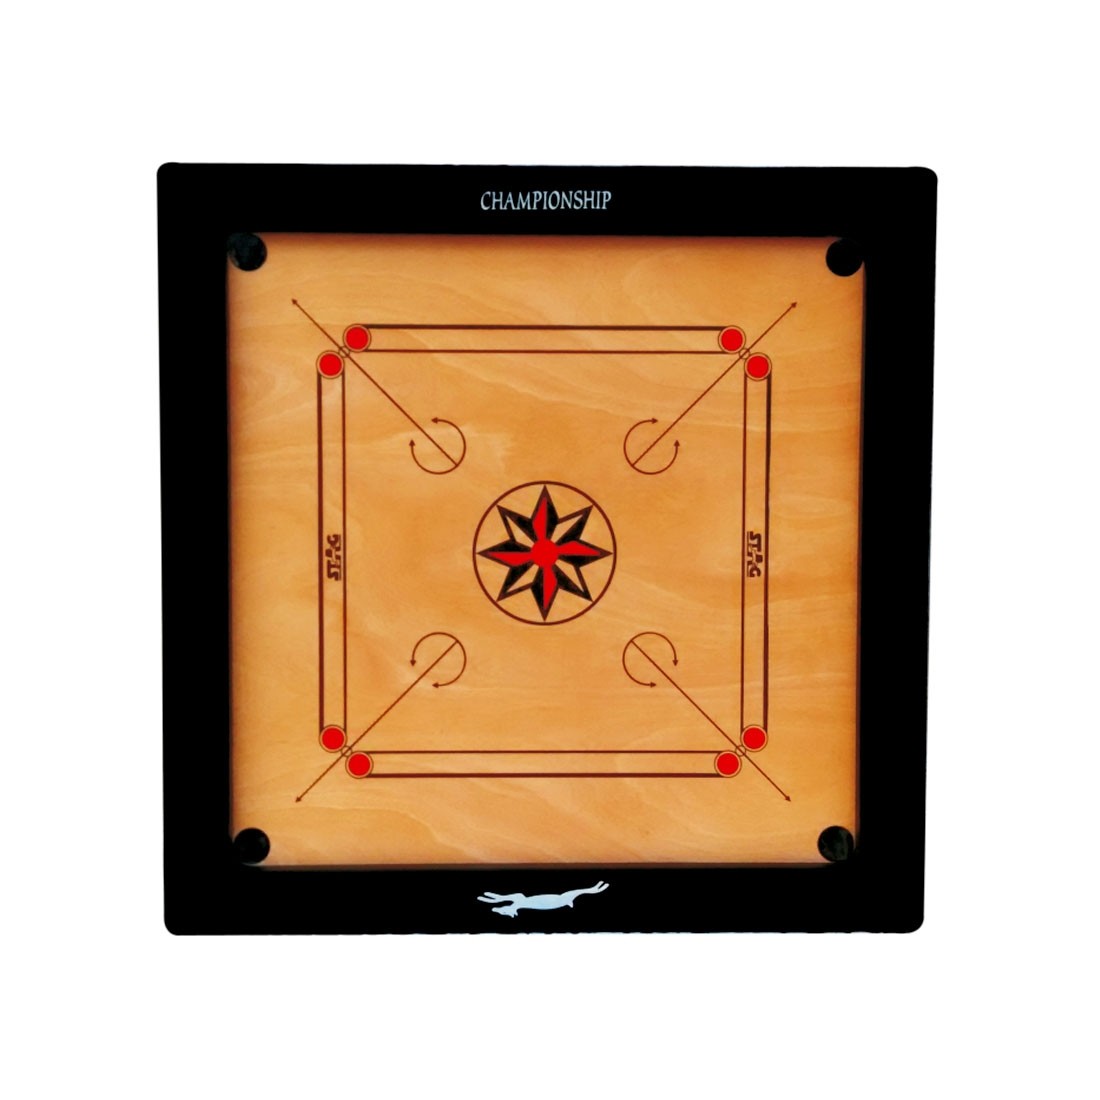 STAG CARROM BOARD CHAMPIONSHIP 2.5" BORDER 12MM M.D.F. WITH LOW STAND